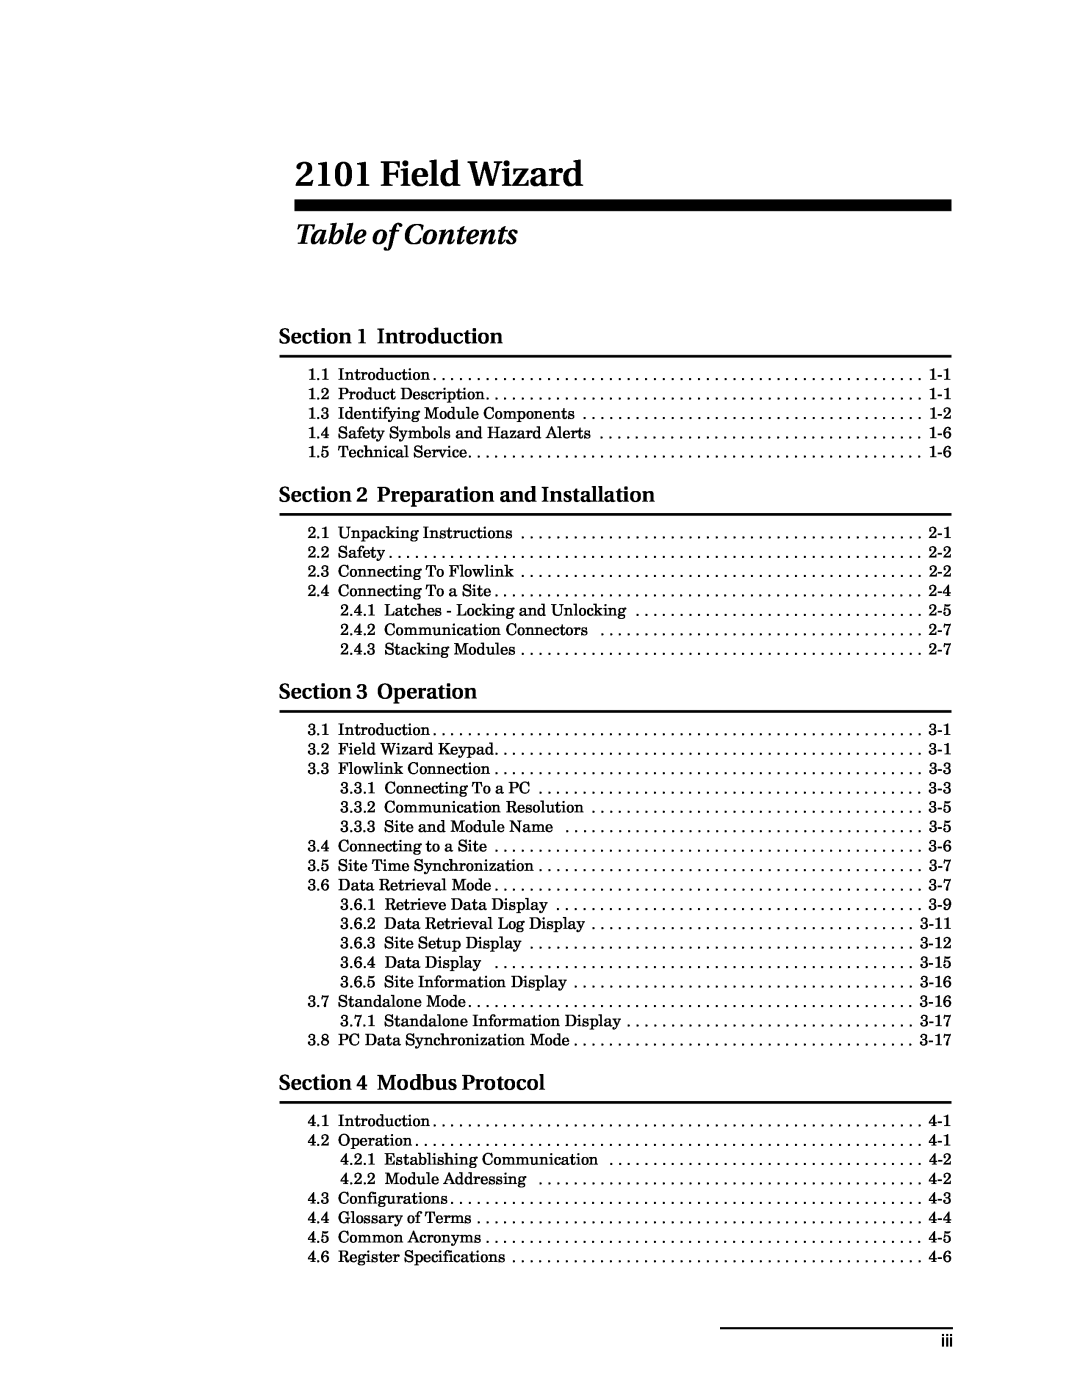 Teledyne 2101 Field Wizard, Table of Contents, Introduction, Preparation and Installation, Operation, Modbus Protocol 